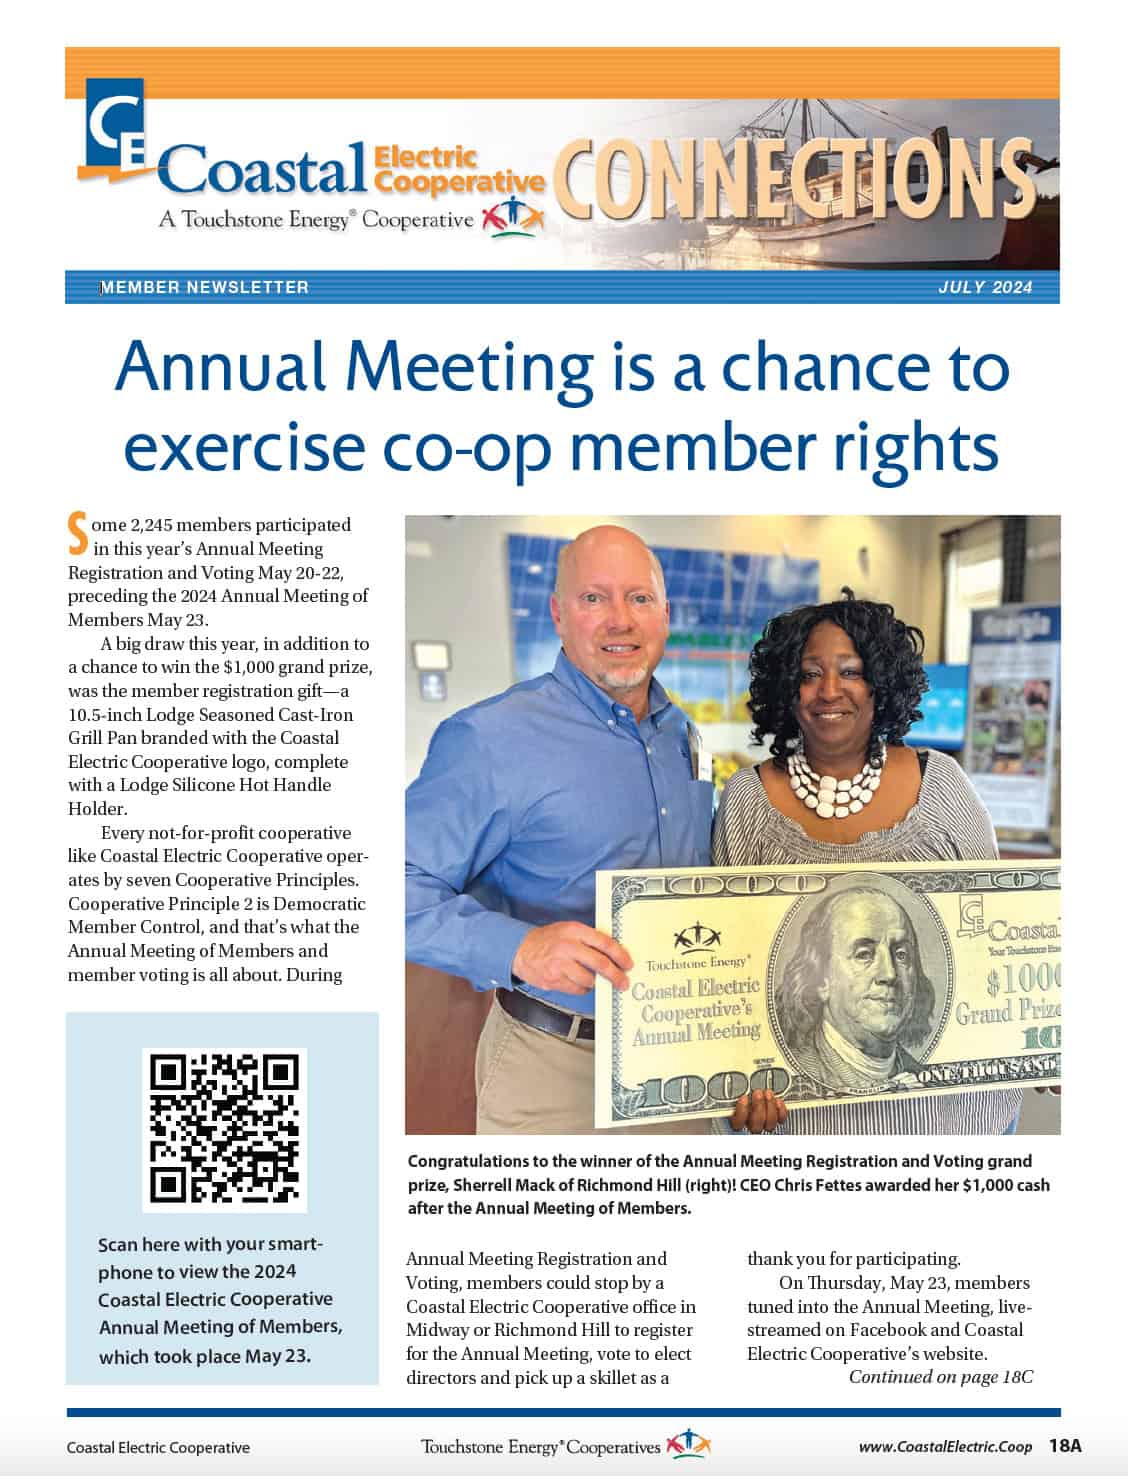 July newsletter cover featuring Sherrell Mack of Richmond Hill as CEO Chris Fettes awarded her $1,000 cash after the Annual Meeting of Members